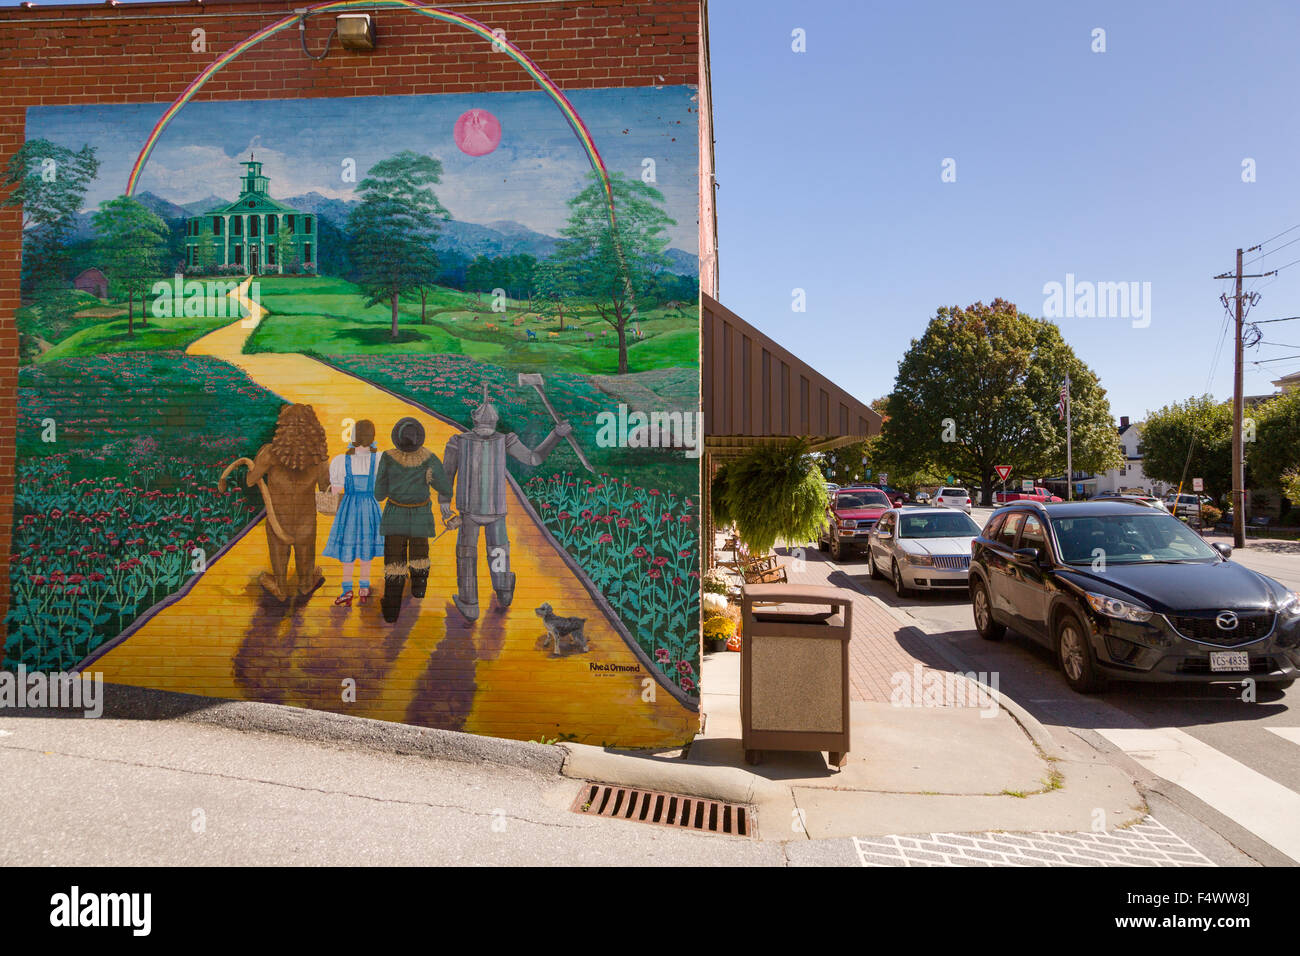 A mural of the the Wizard of Oz painted on the side of a building in the tiny village of Burnsville, North Carolina. Burnsville is the start of the Quilt Trail which honors handmade quilt designs of the rural Appalachian region. Stock Photo